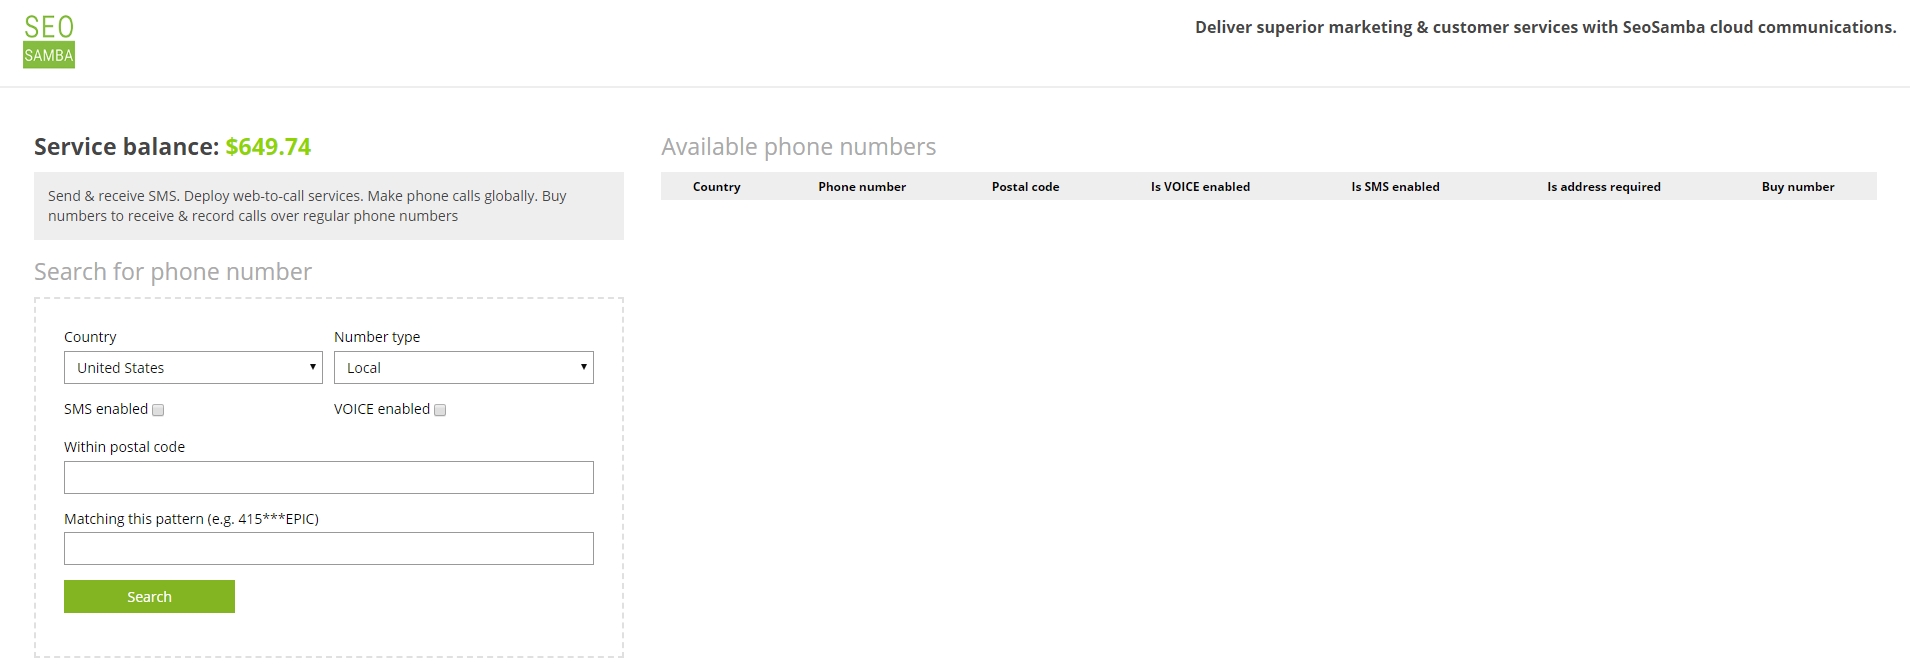 search for a phone number with desired options